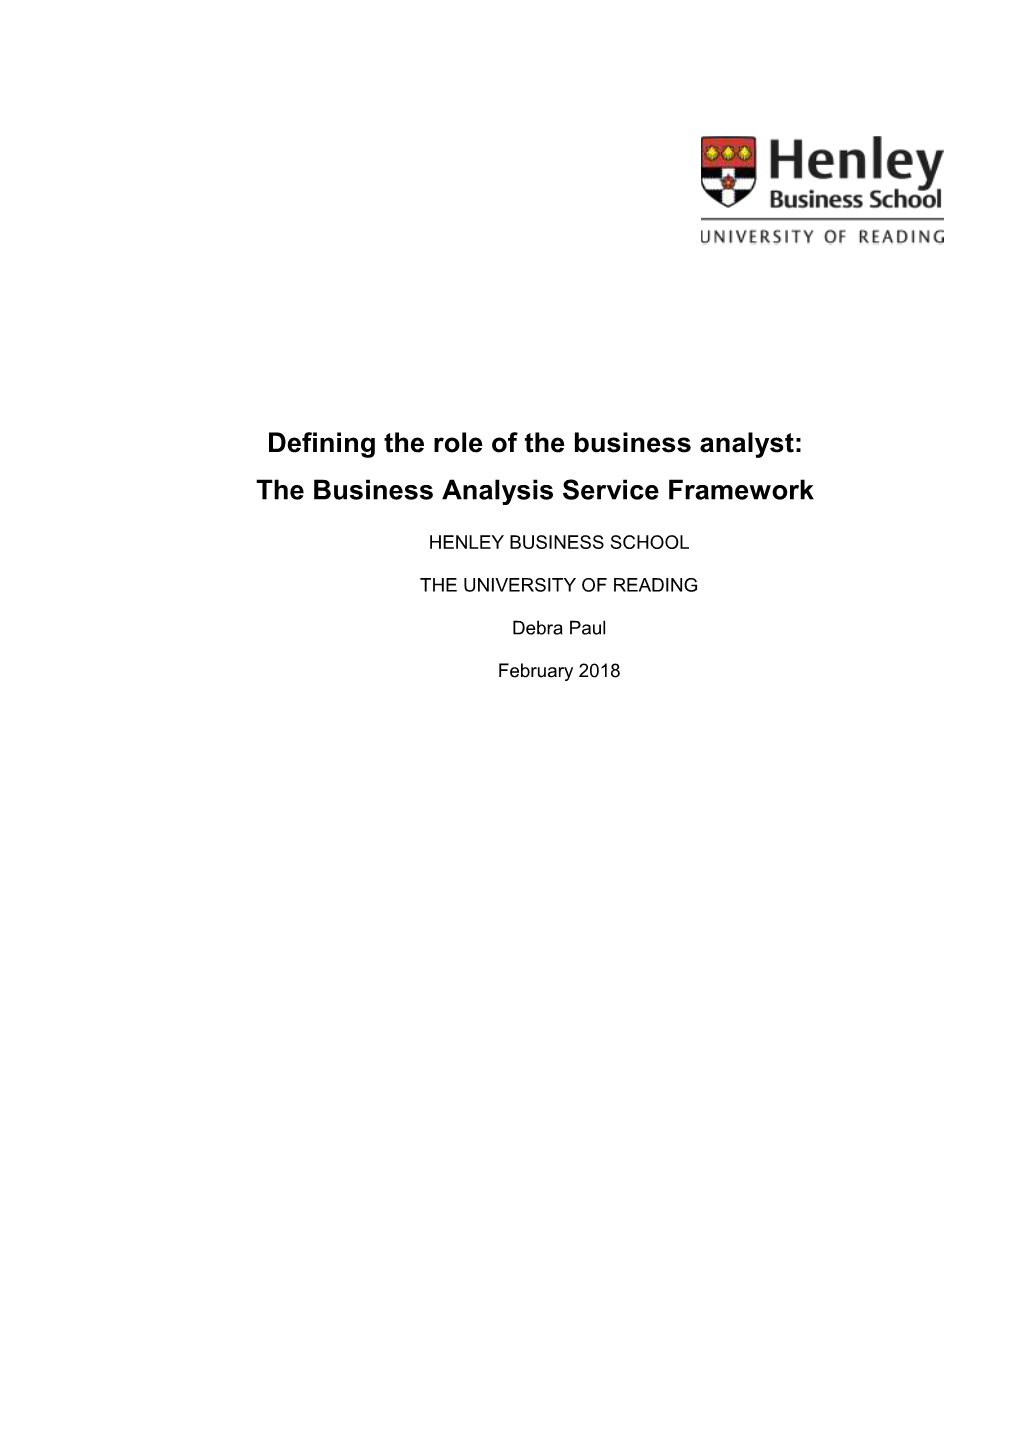 Defining the Role of the Business Analyst: the Business Analysis Service Framework